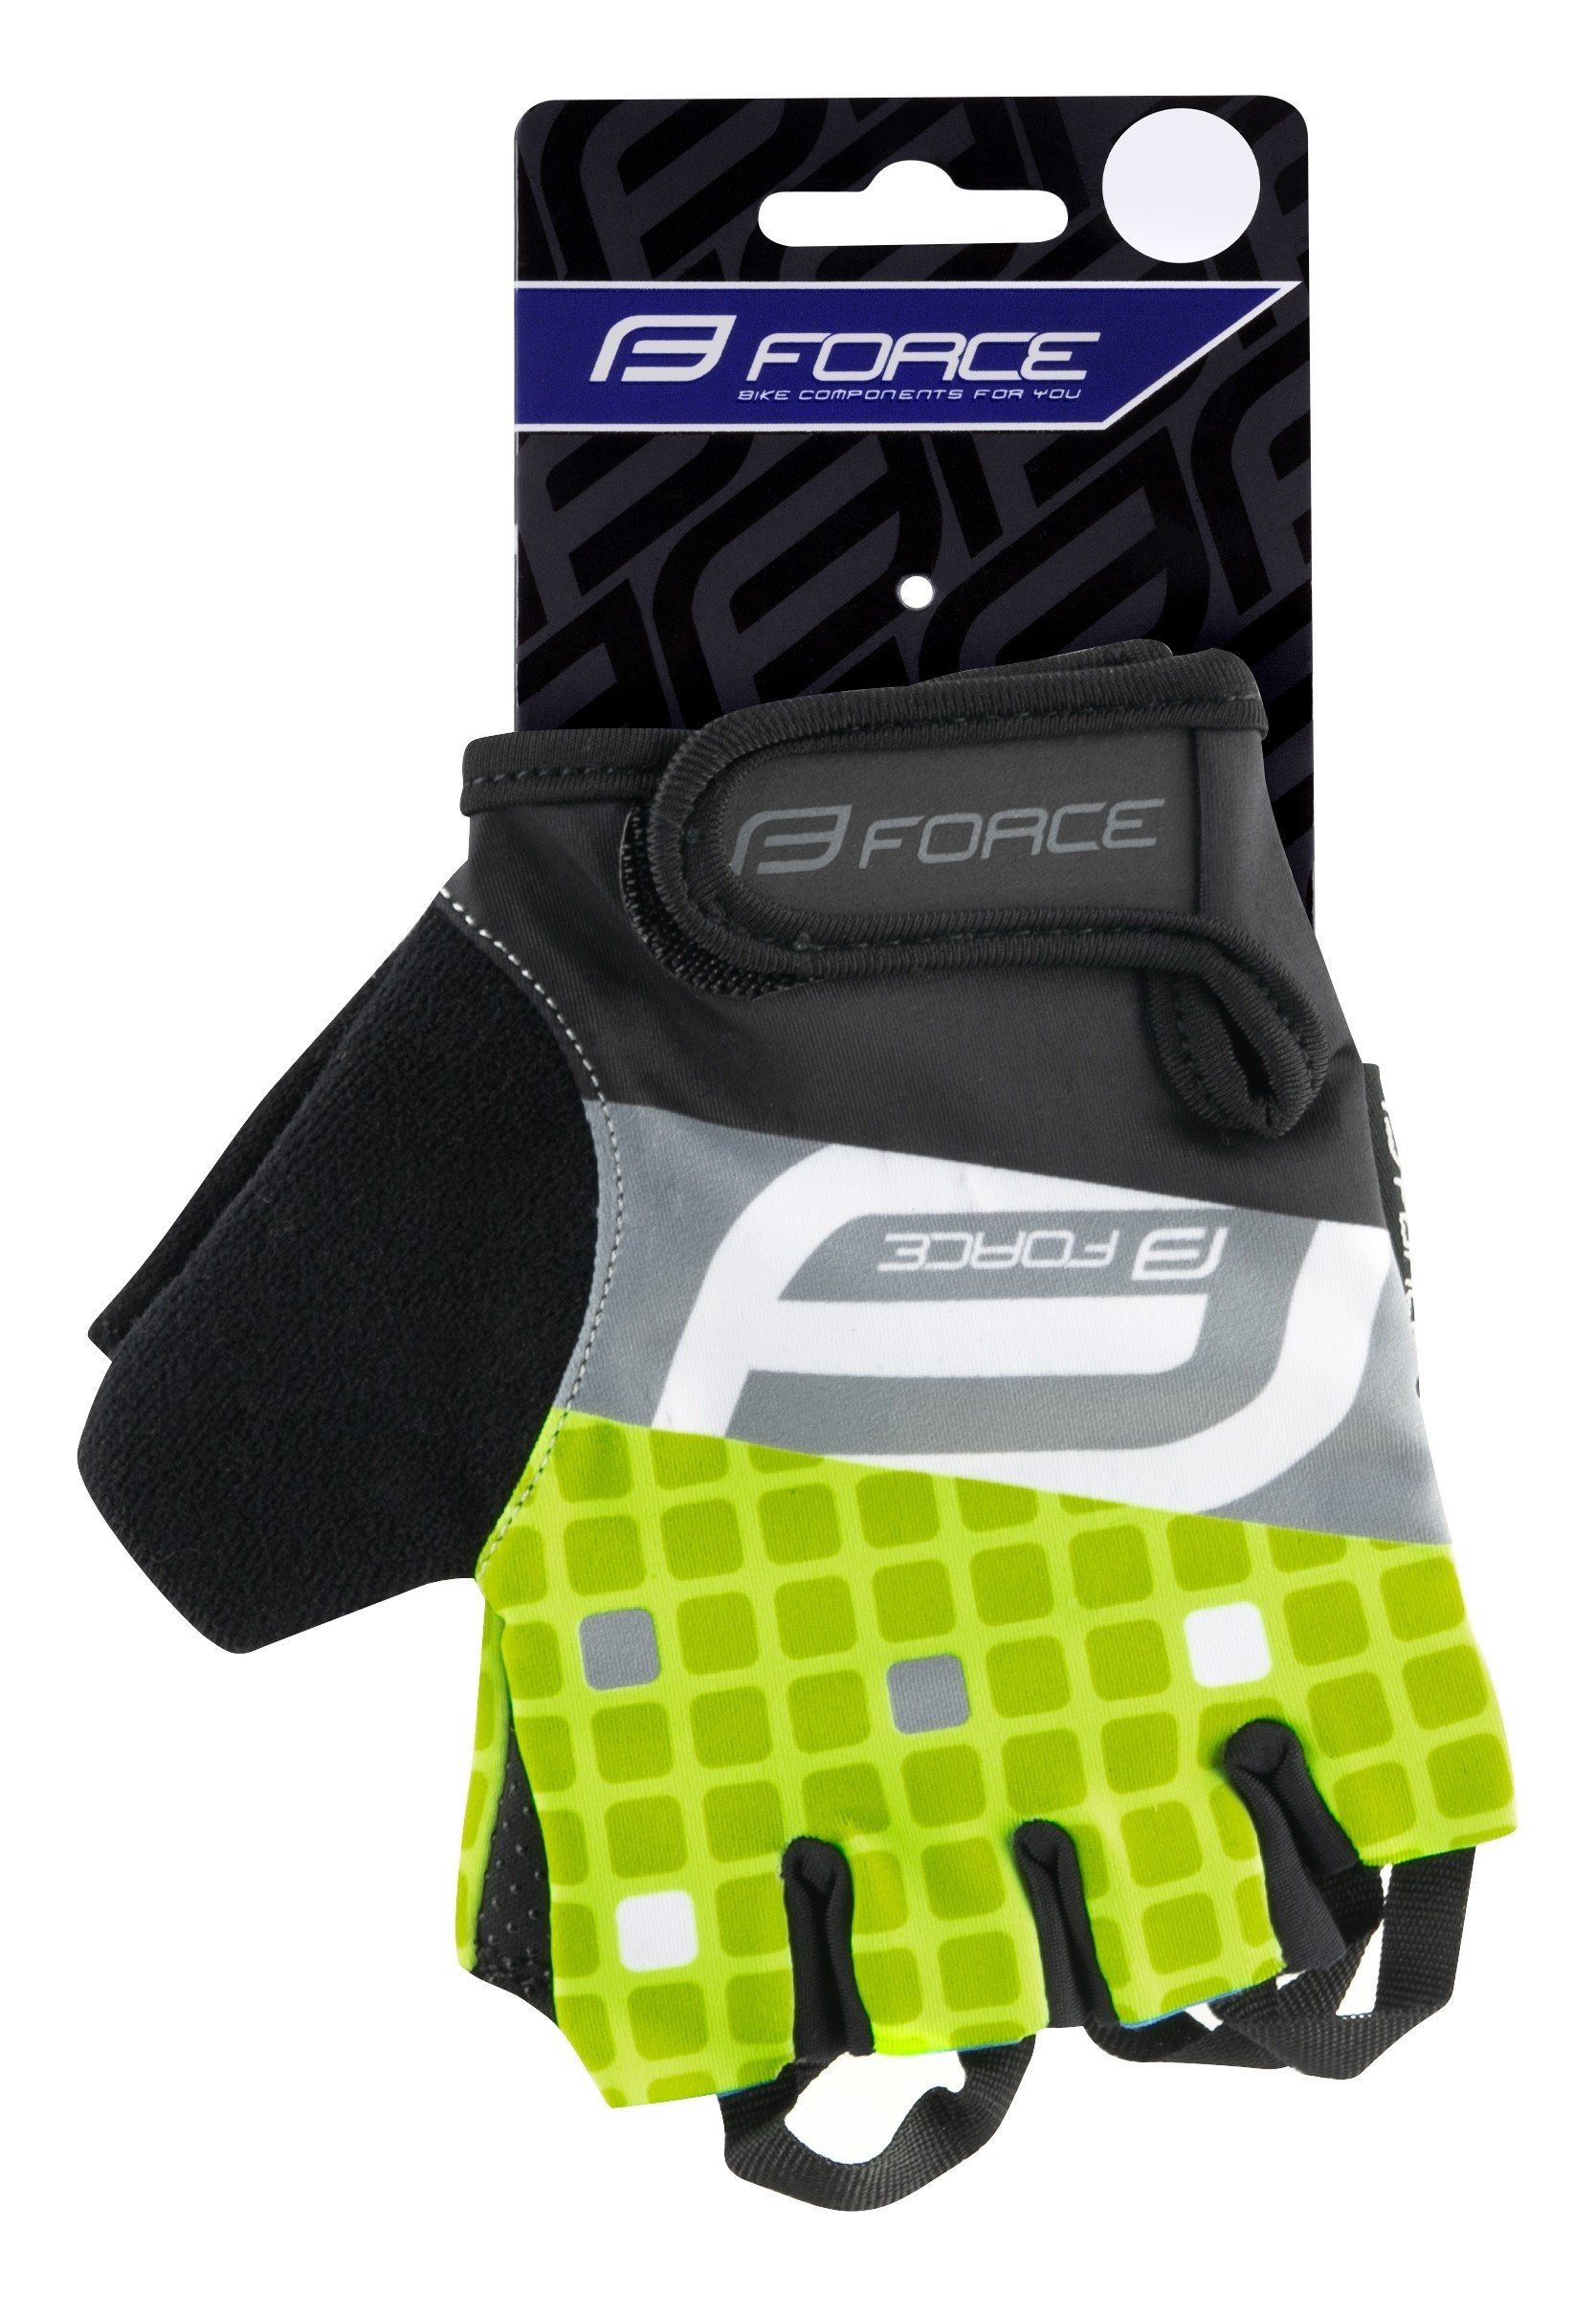 FORCE SQUARE Handschuhe FORCE Fahrradhandschuhe fluo